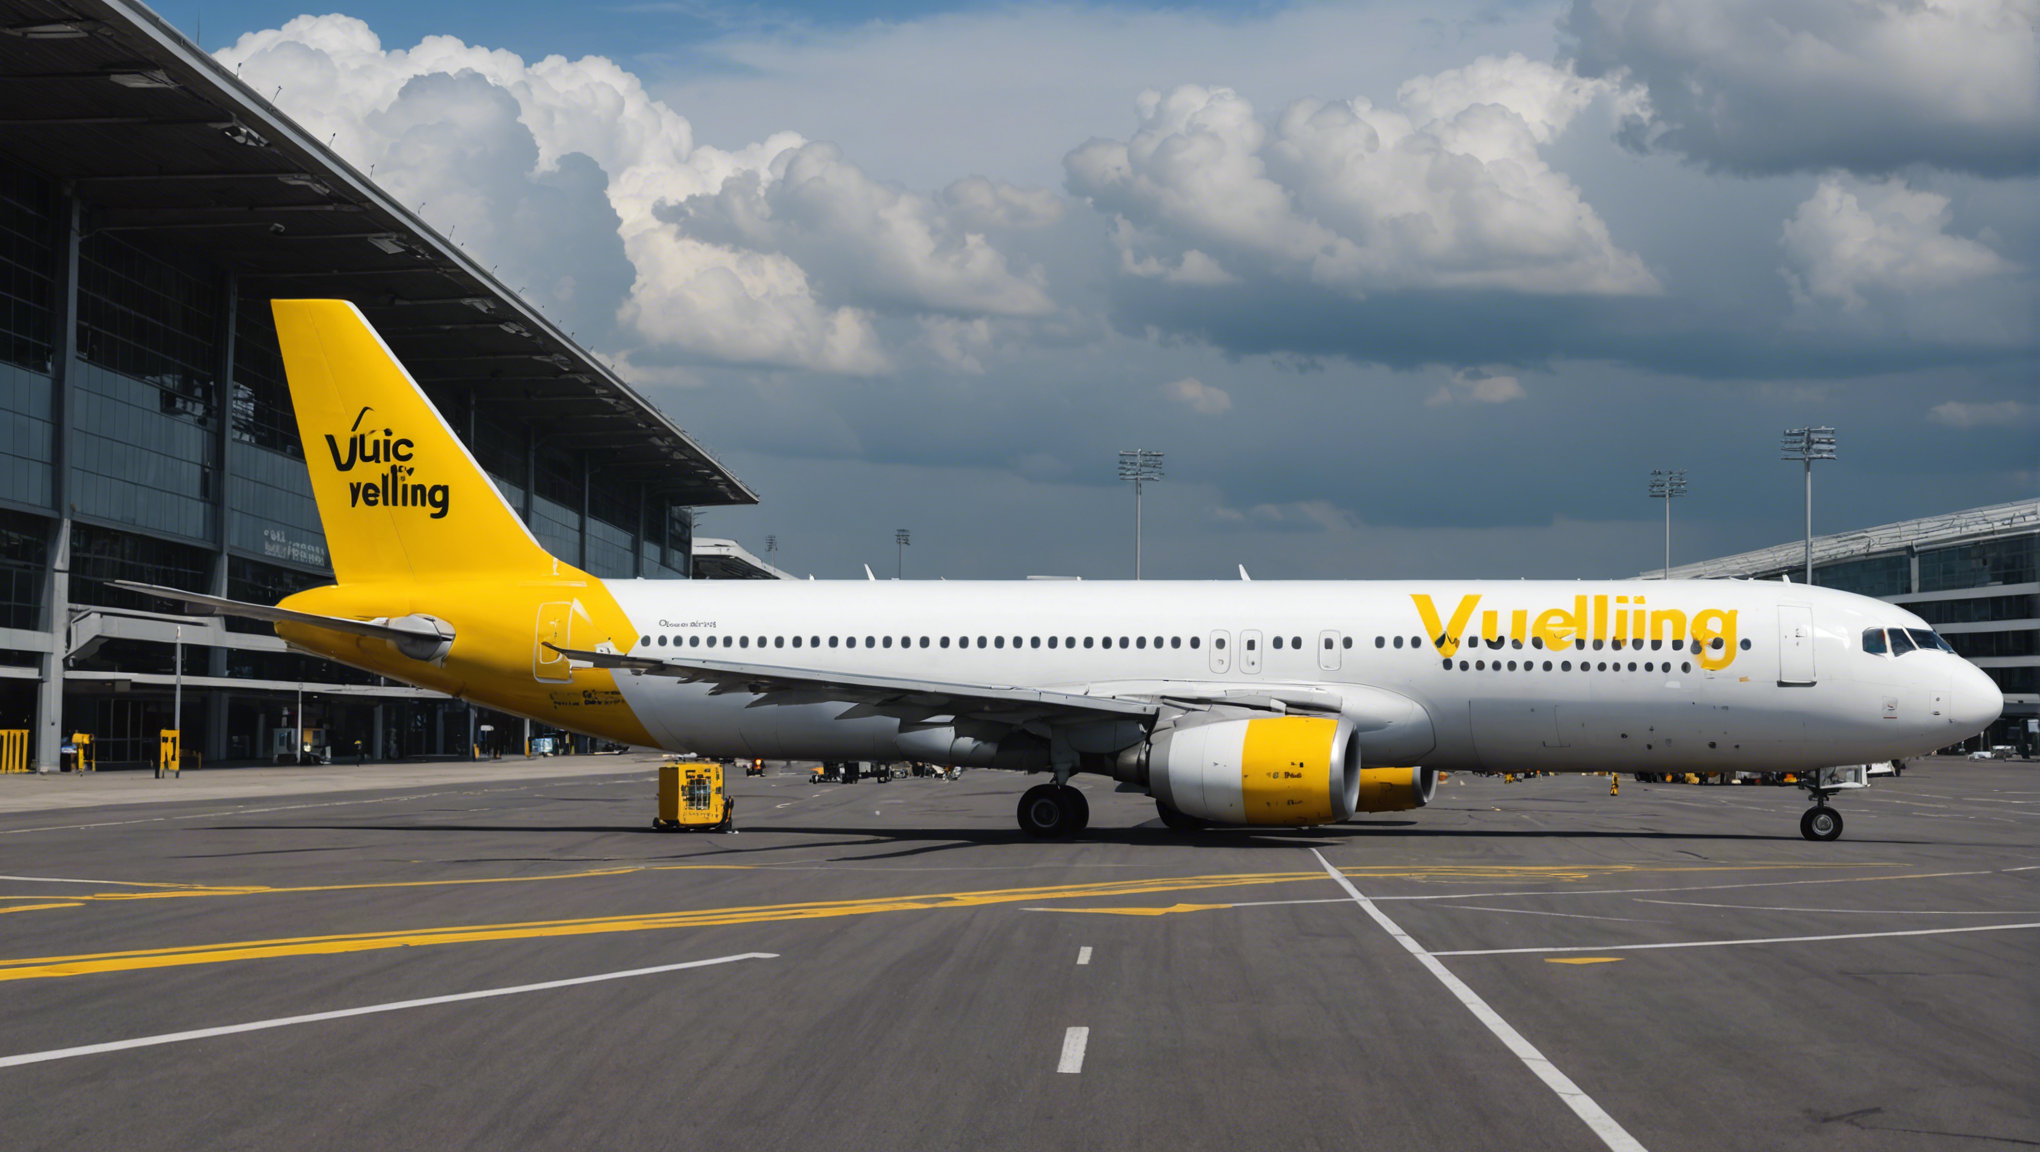 vueling condemned for abusive practices in the event of flight delays or cancellations. find out the consequences of the airline's actions on its passengers and their rights in such situations.